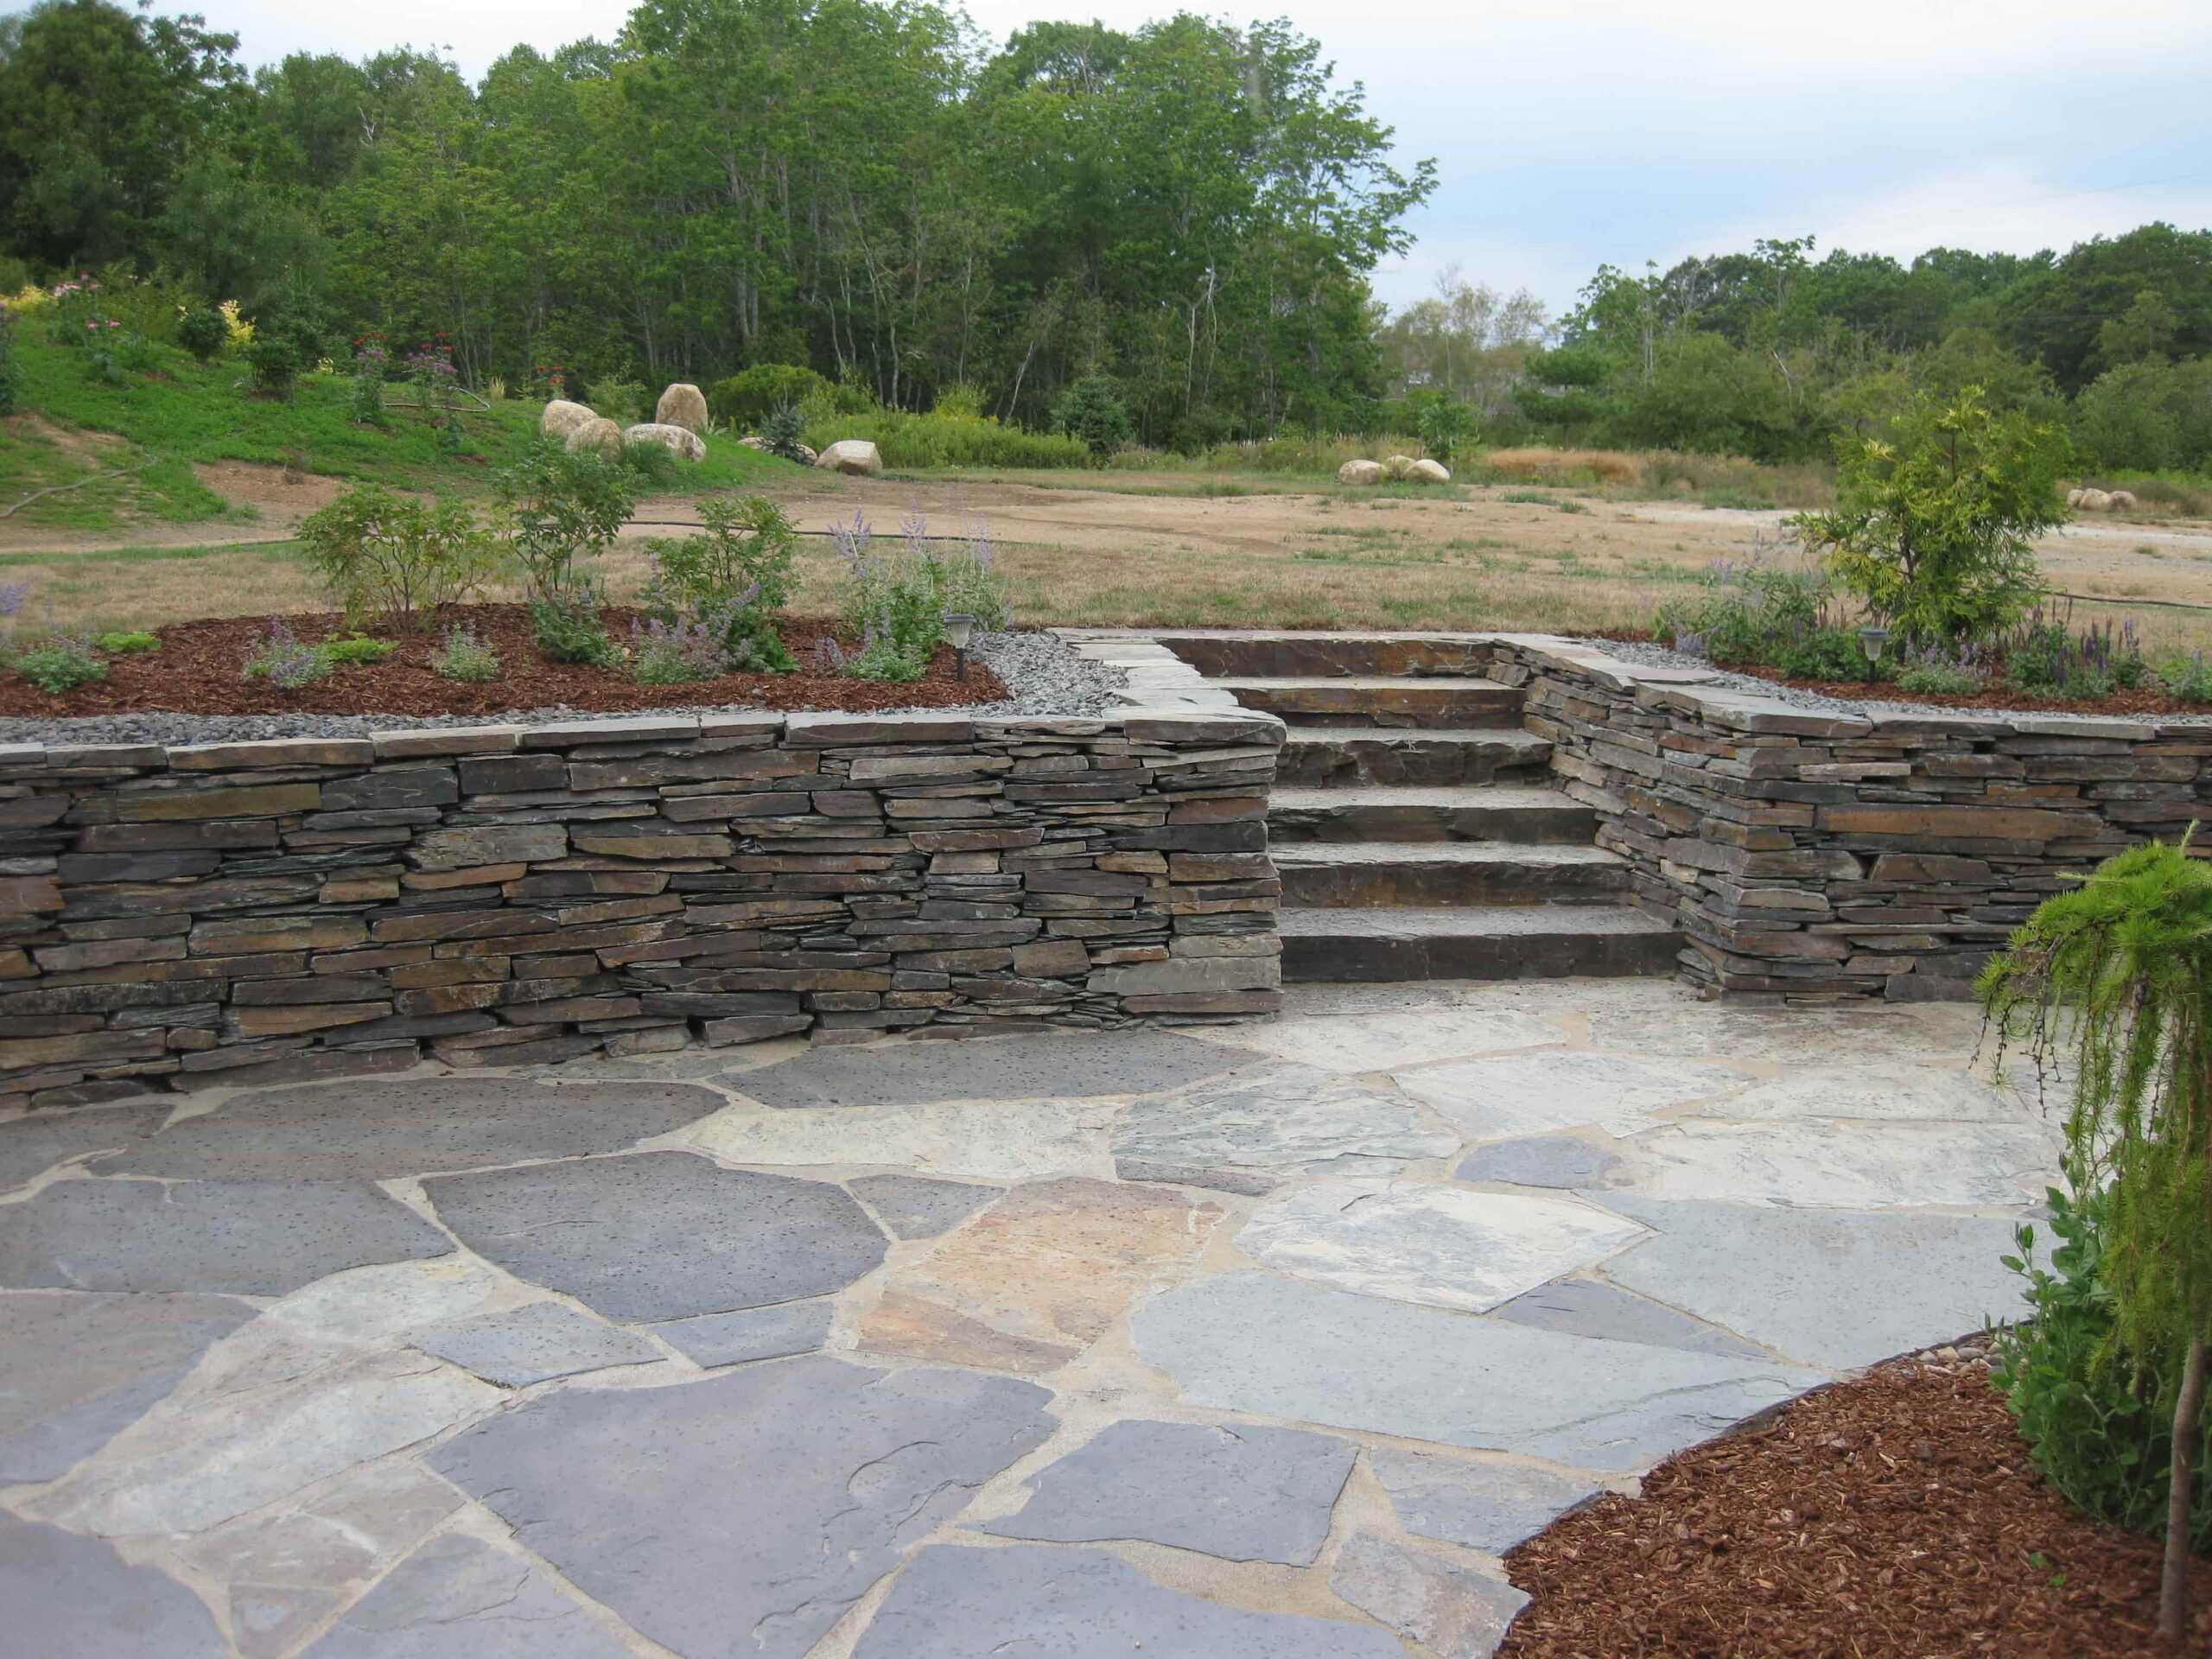 A stone path with stairs leading to higher ground